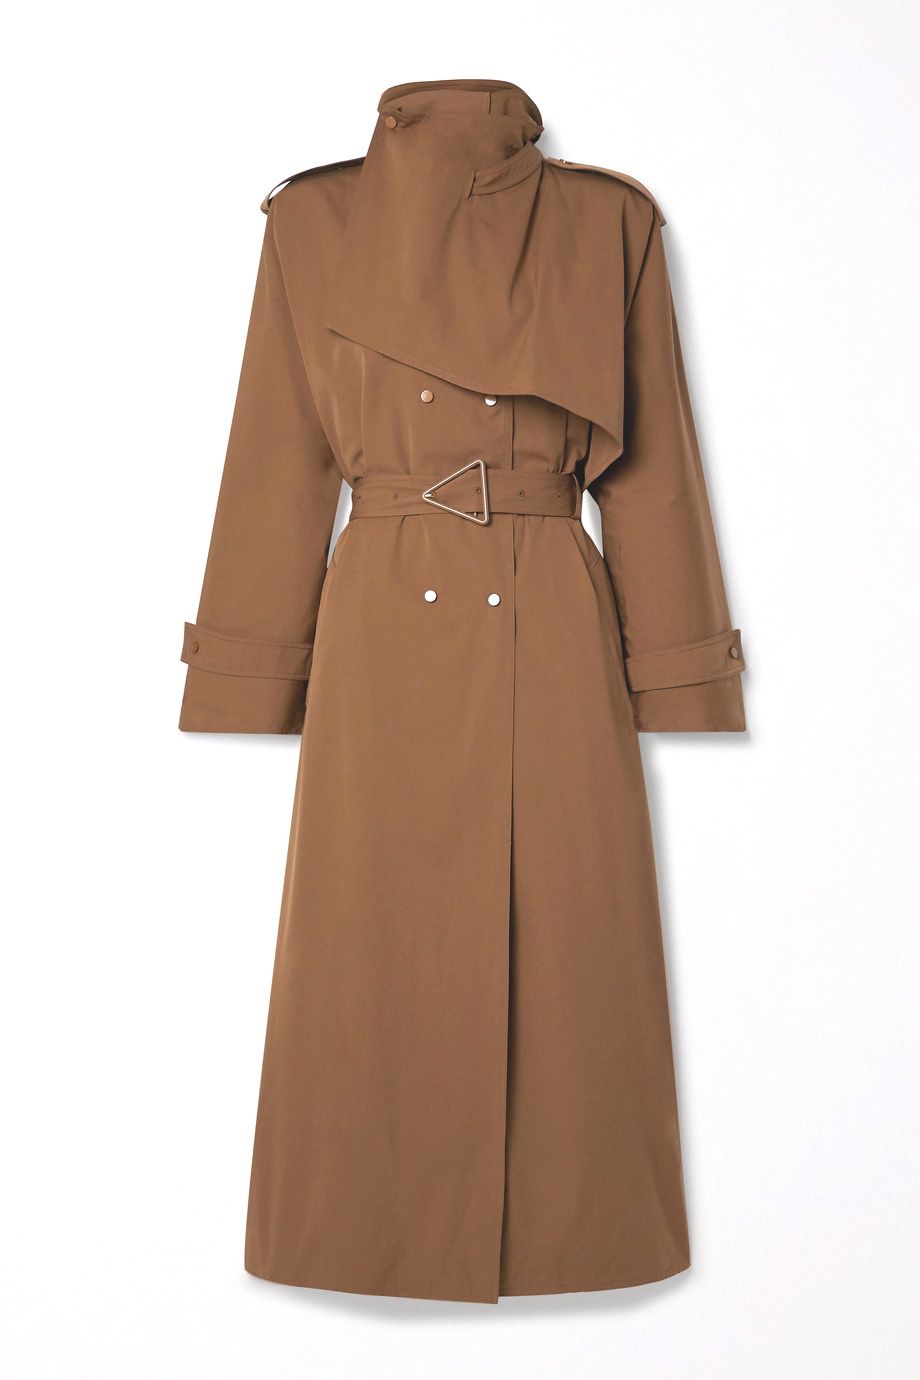 which burberry trench coat to buy